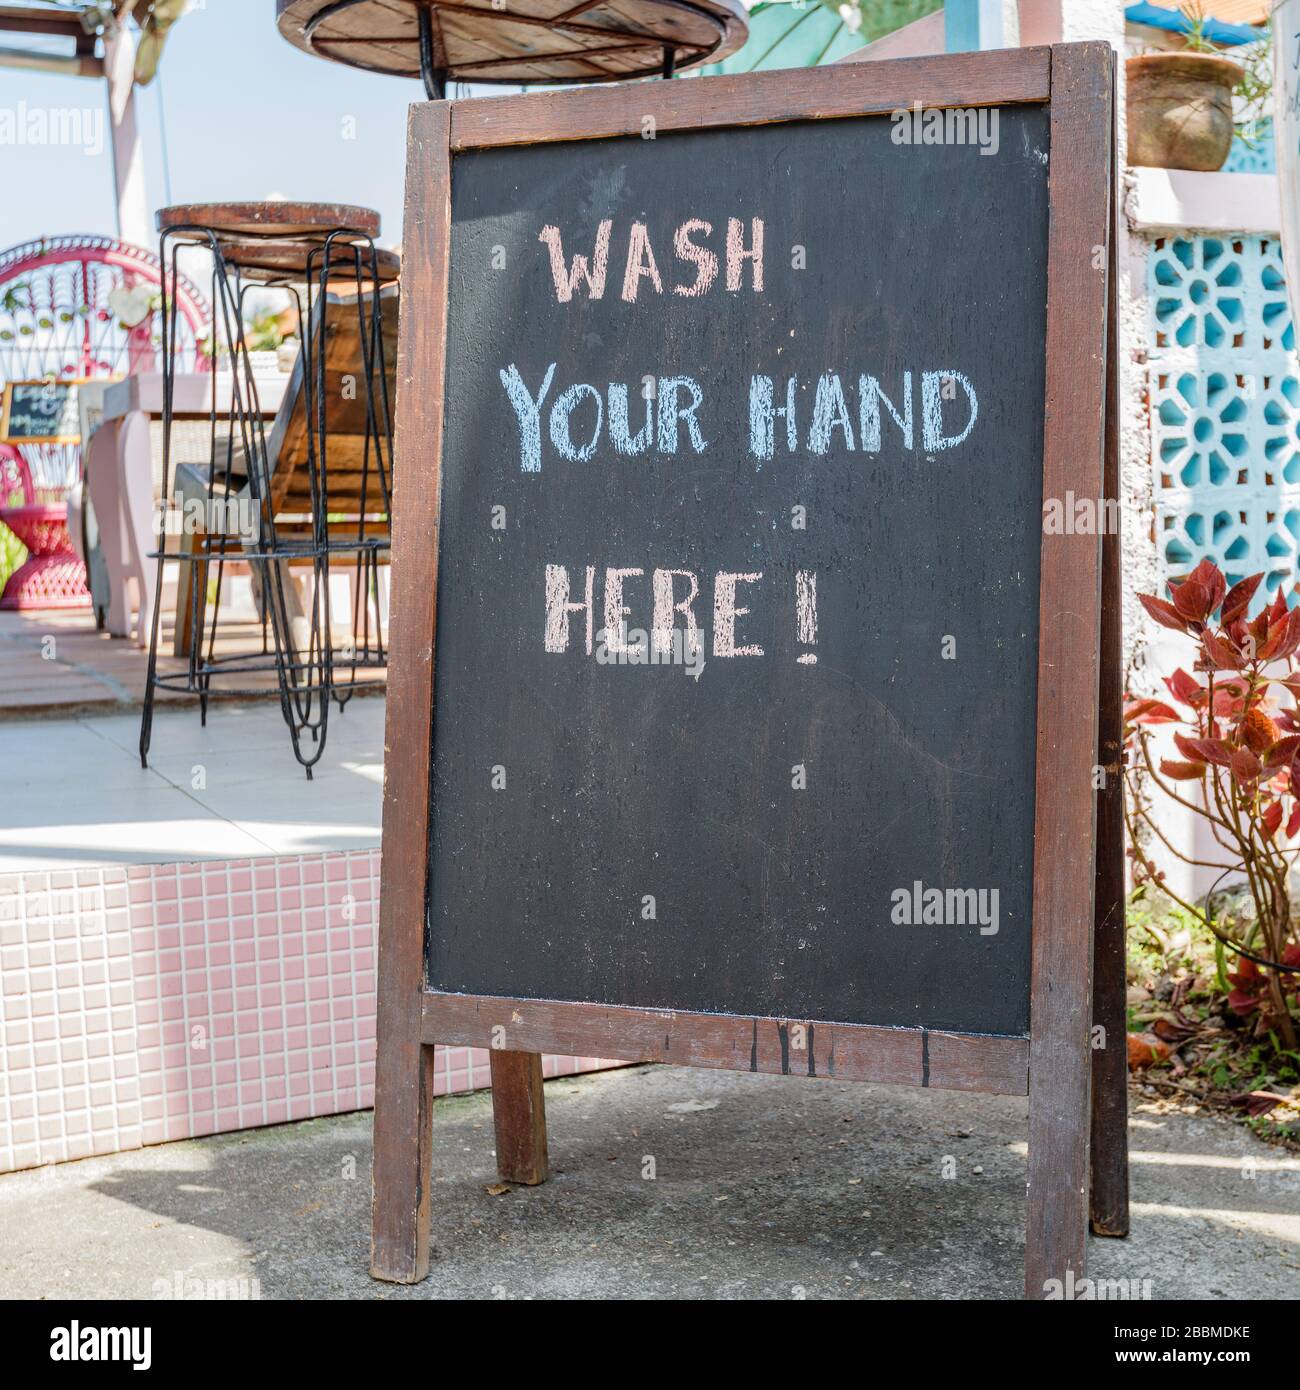 Cafe sign 'wash your hands here' during quarantine for COVID-19. Canggu, Bali popular tourist area. Indonesia. Square image. Stock Photo